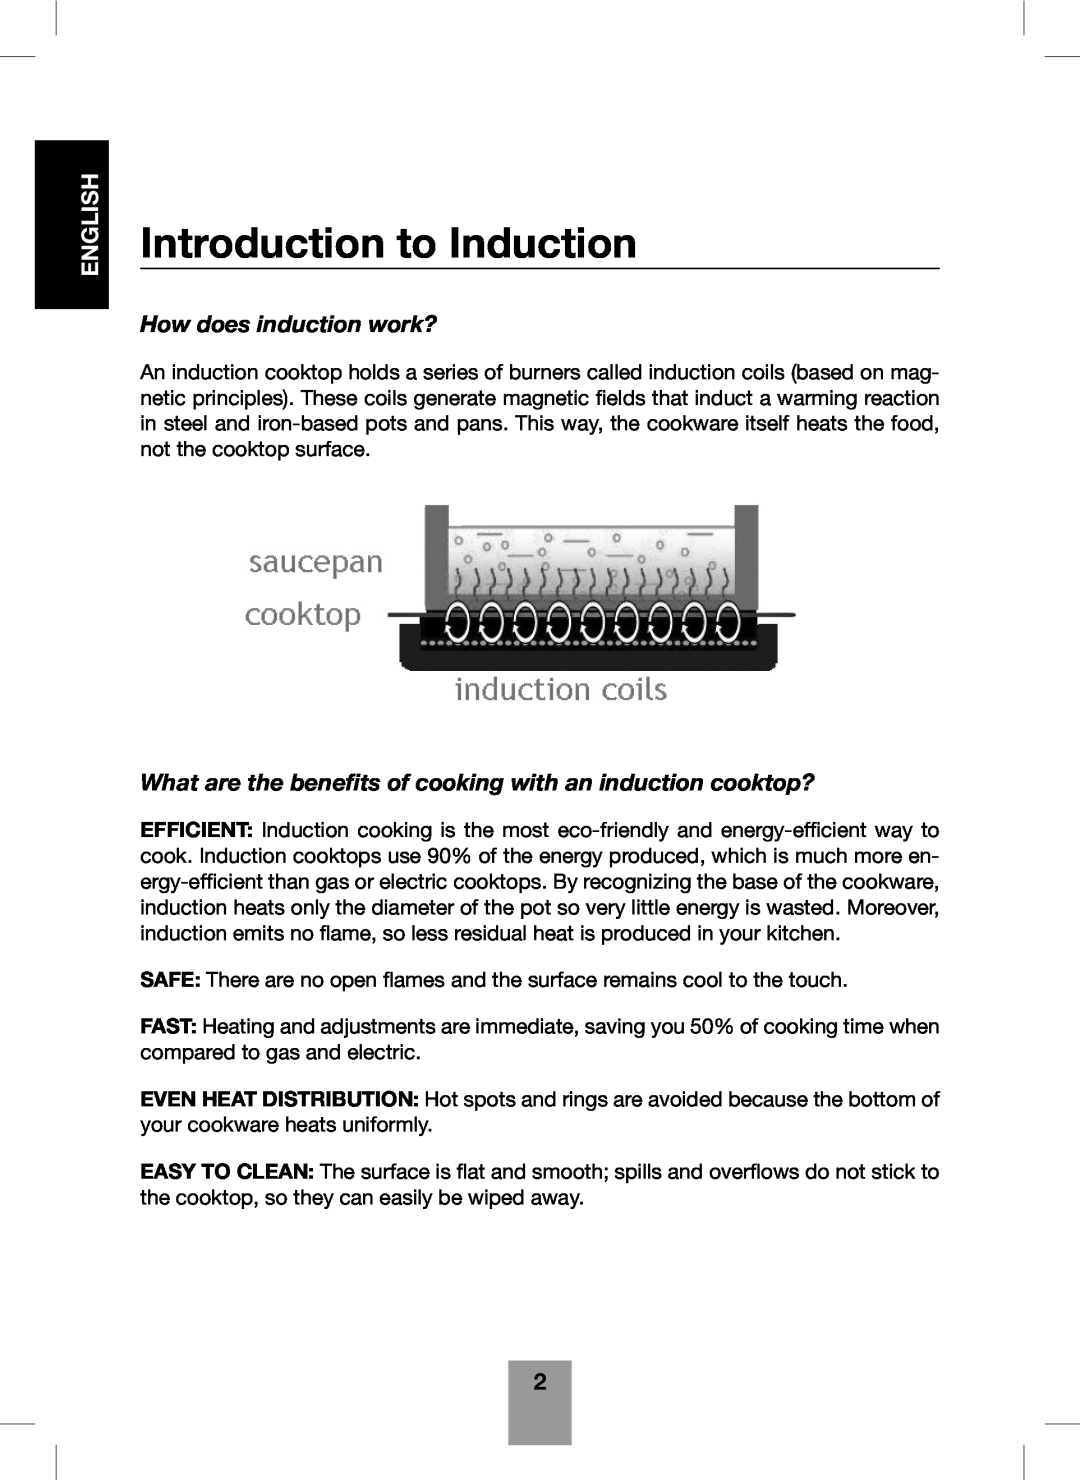 Fagor America Portable Induction Cooktop user manual Introduction to Induction, How does induction work?, English 